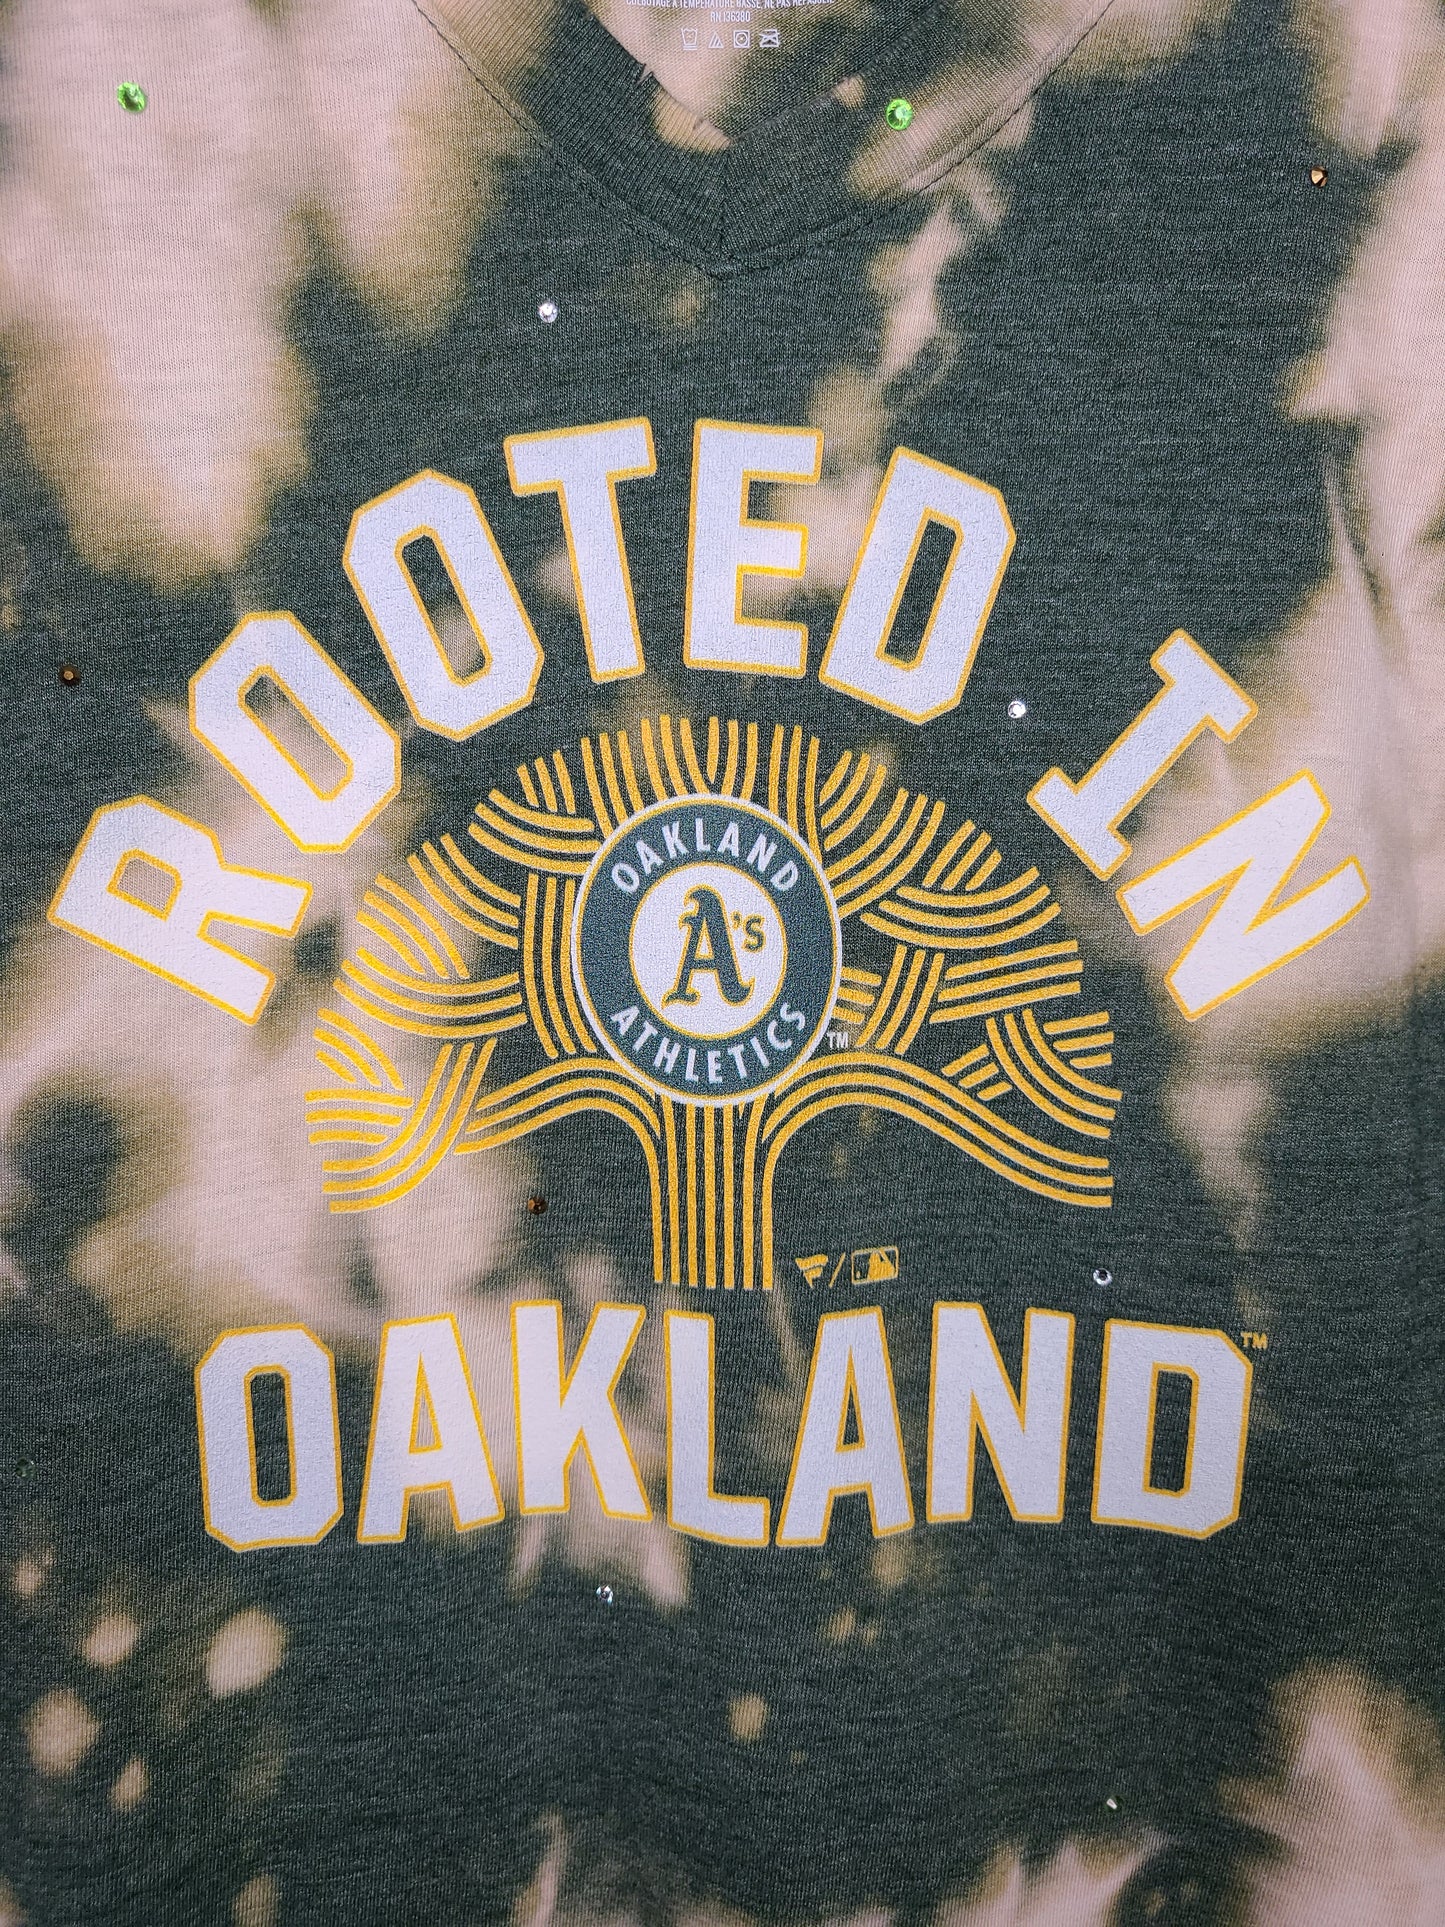 Oakland Athletics Fitted Tee